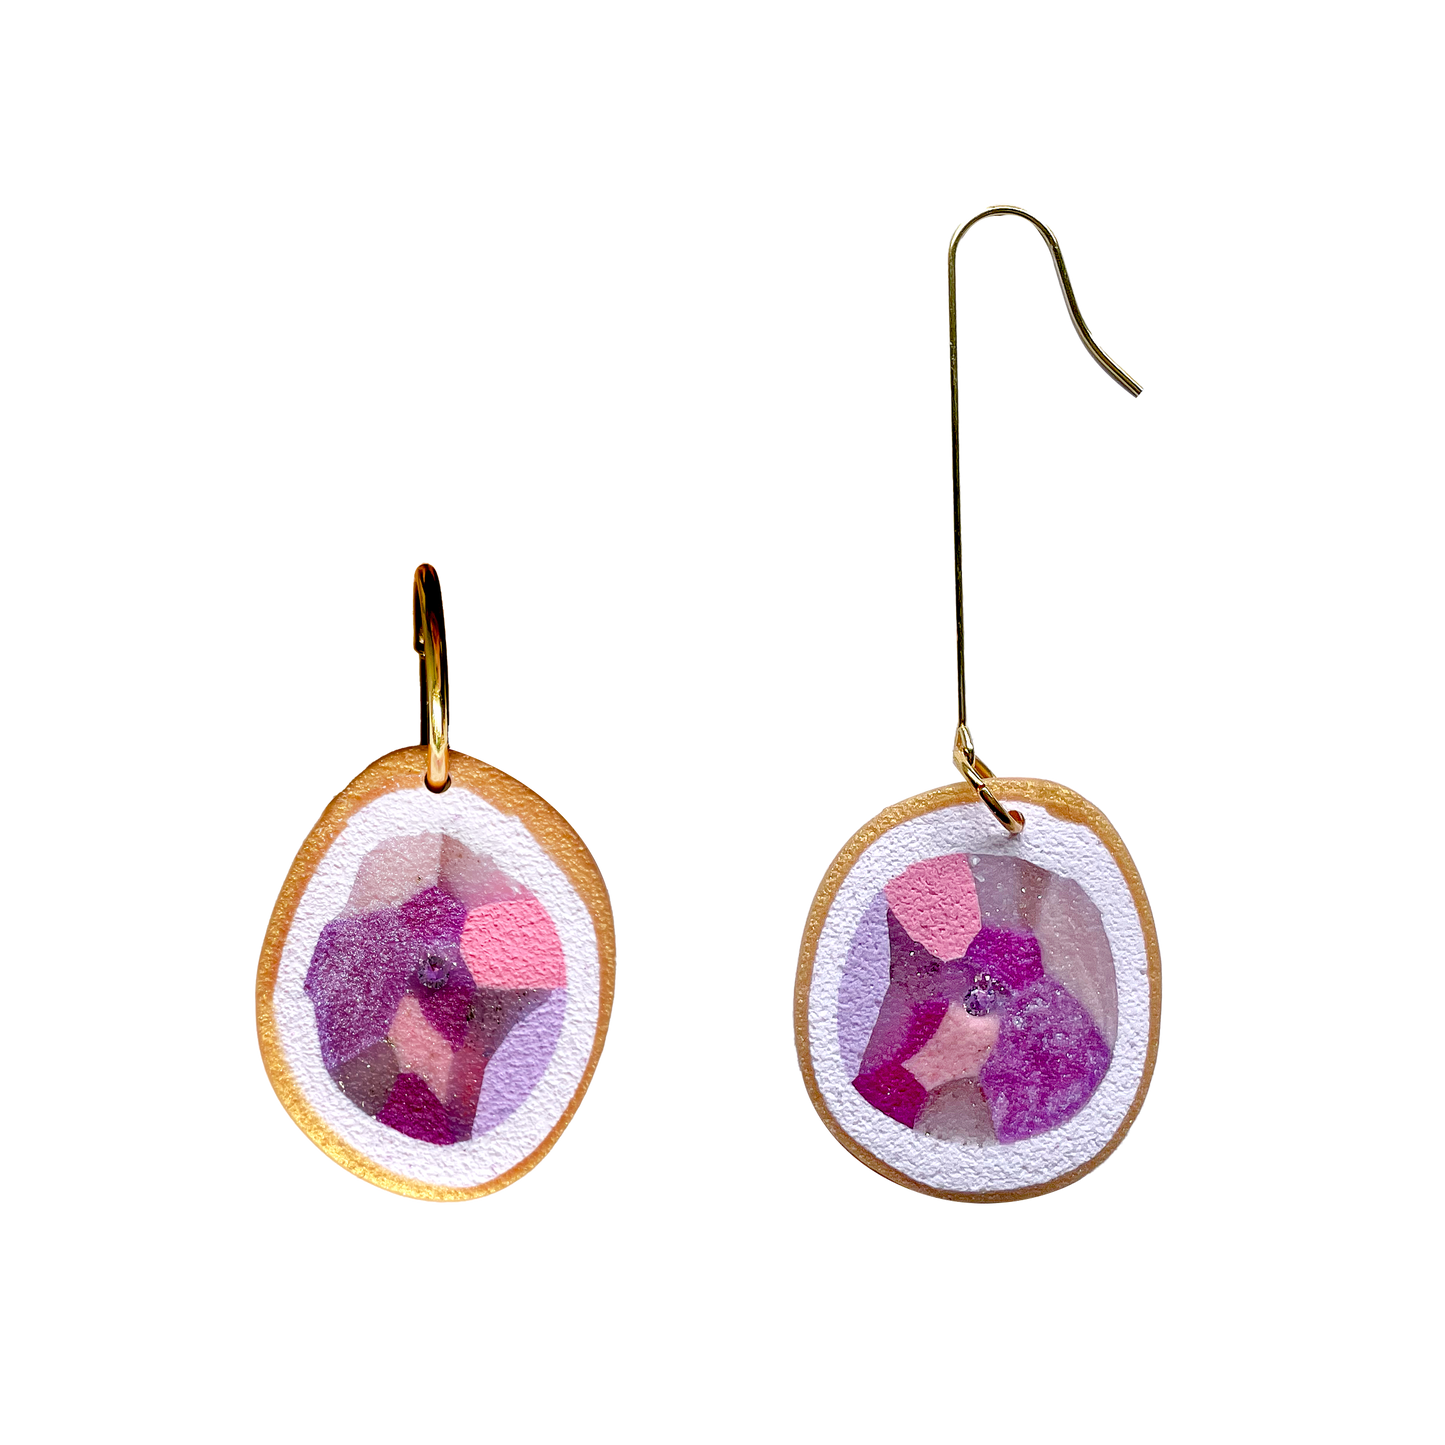 Shades of Purple | The Geode Collection